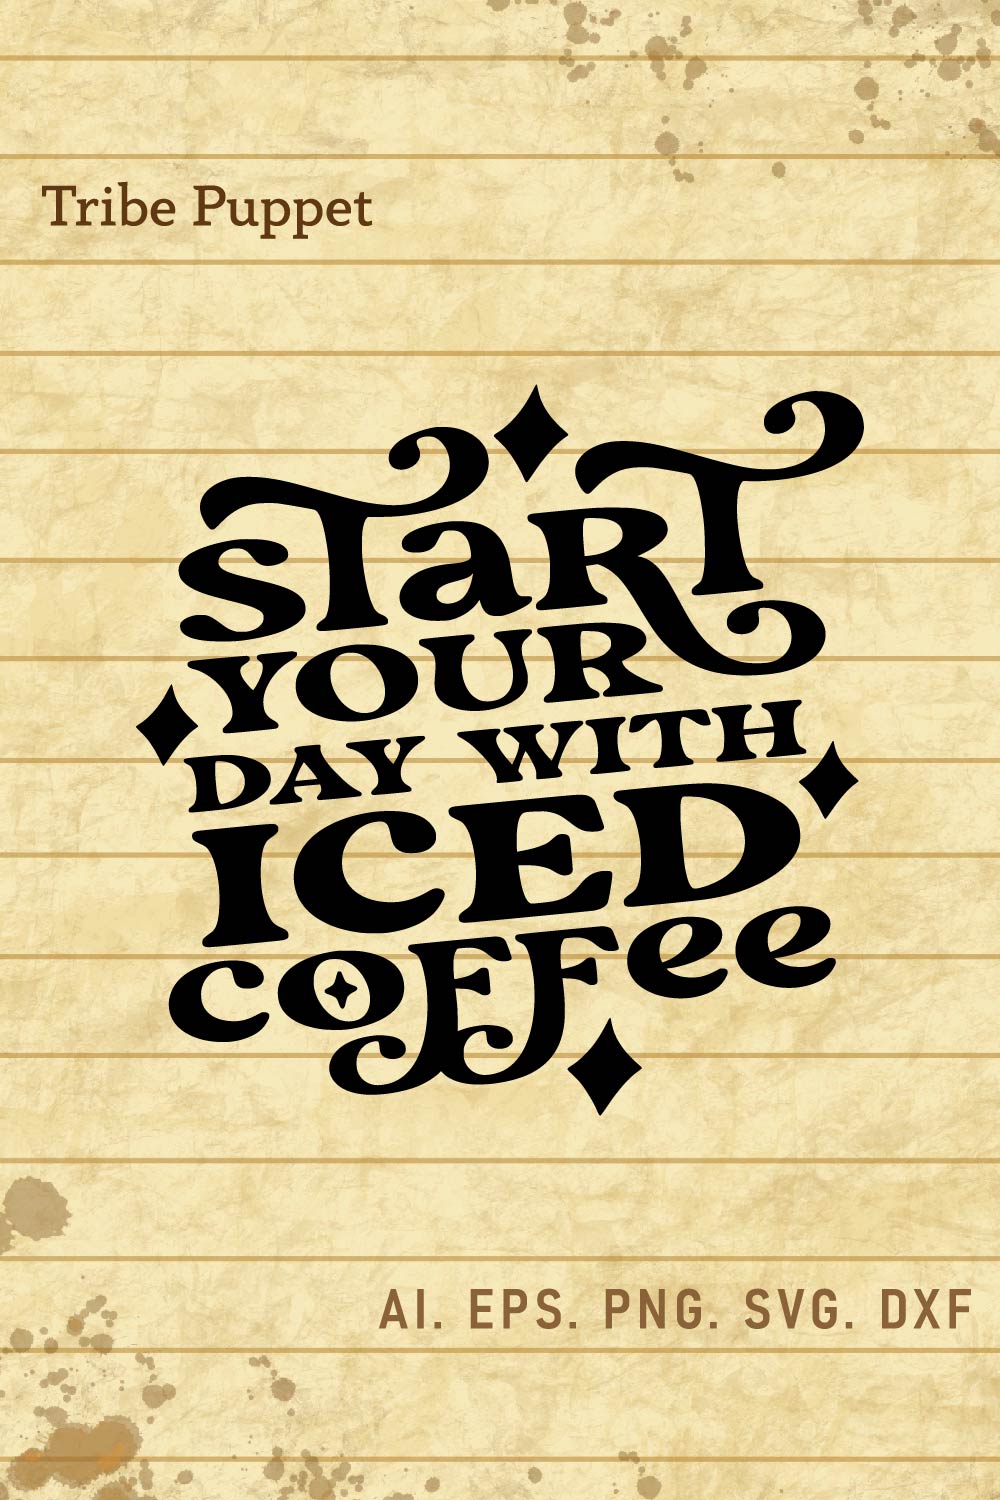 Coffee Quotes pinterest preview image.